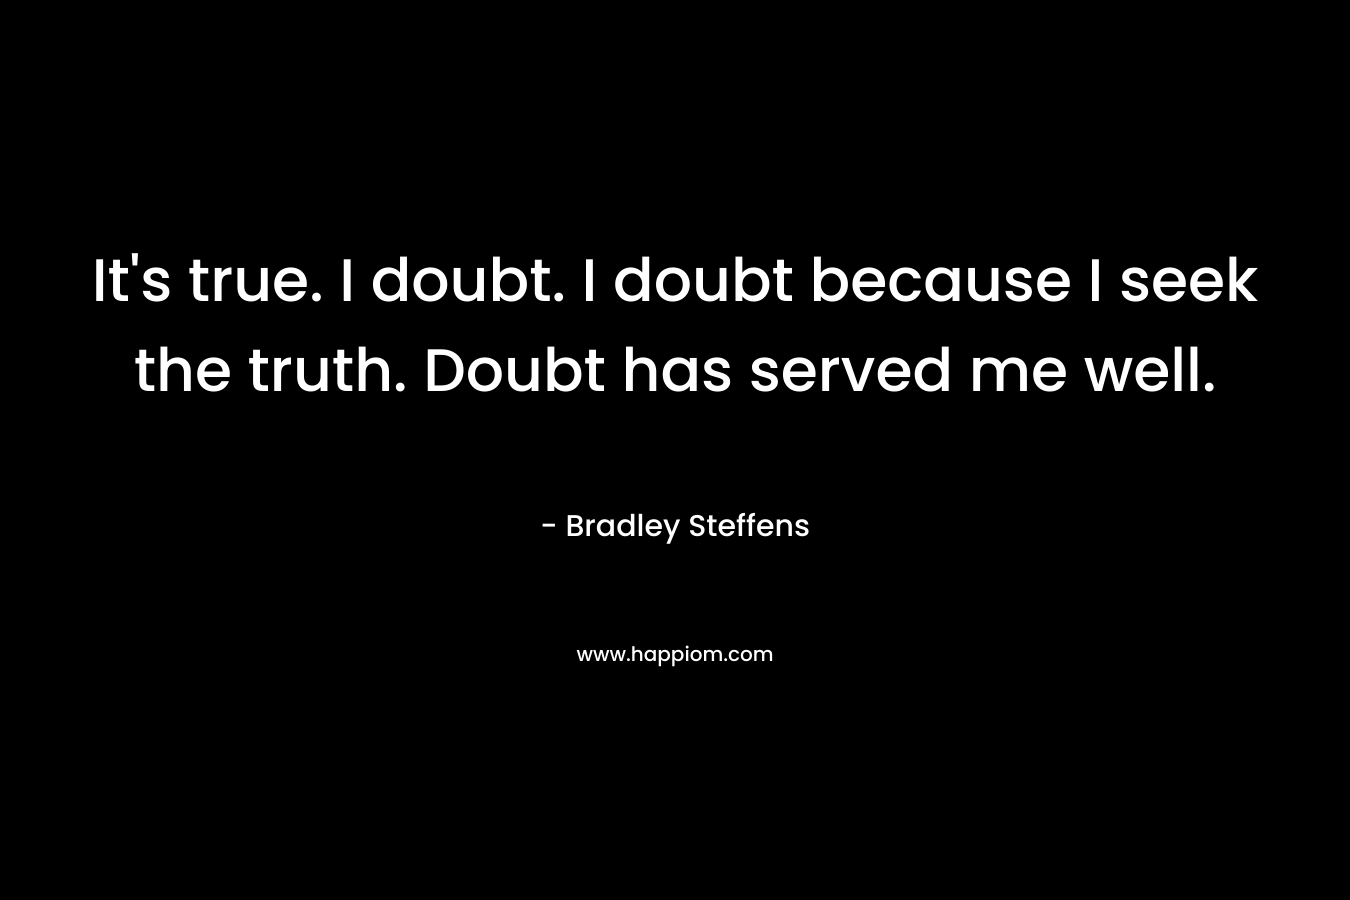 It's true. I doubt. I doubt because I seek the truth. Doubt has served me well.